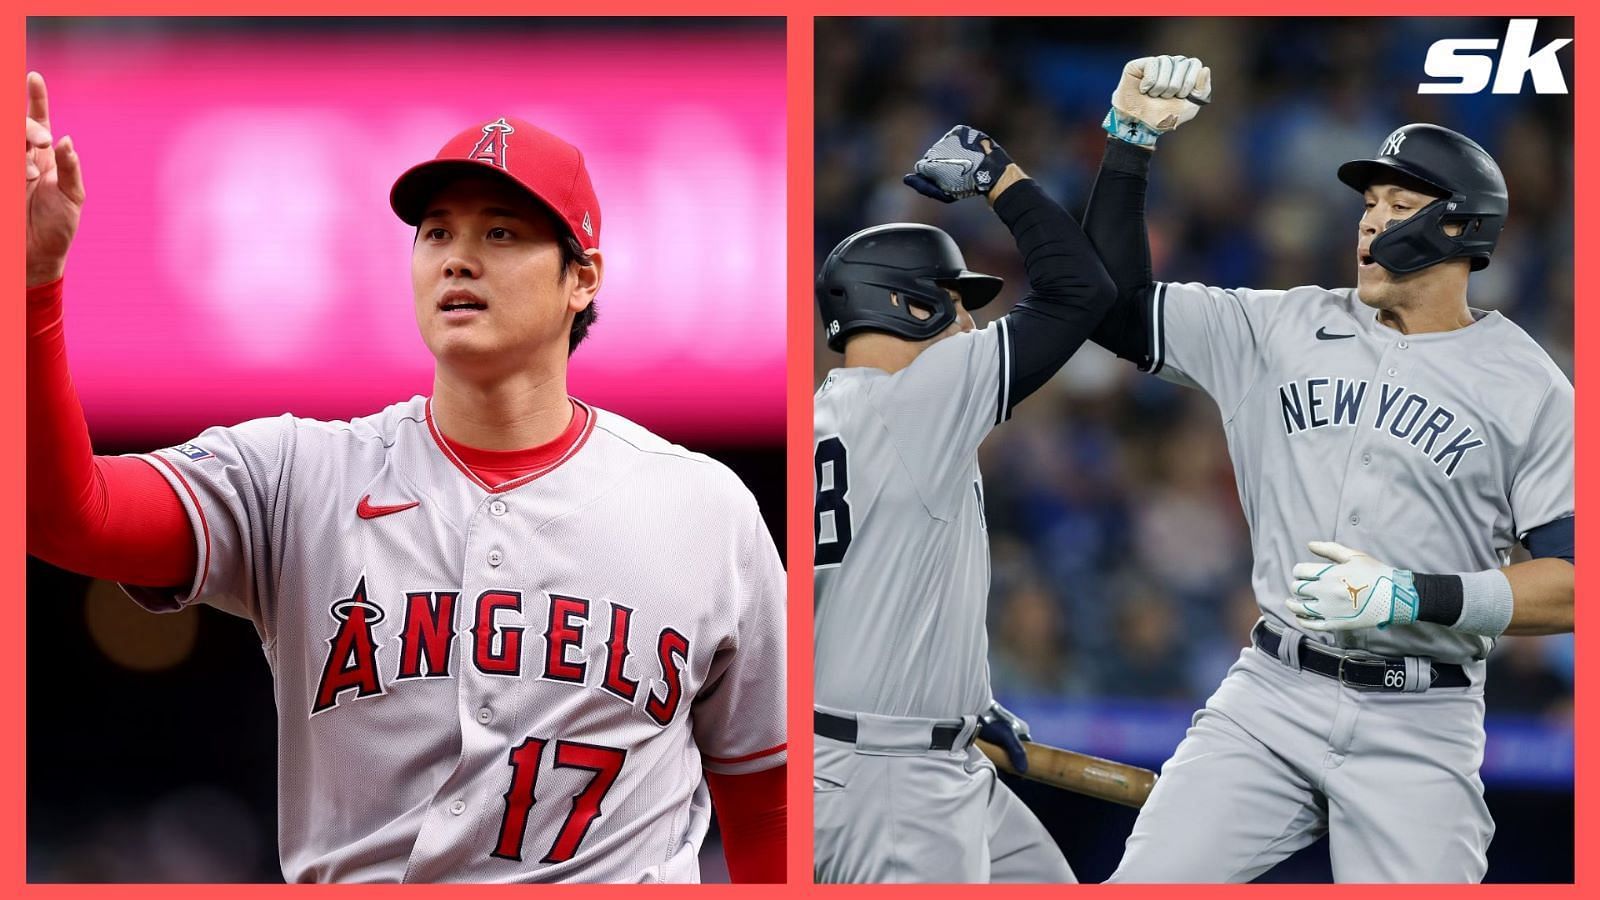 MLB Analyst John Smoltz believes a trade for $30,000,000 Shohei Ohtani would make New York Yankees World Series favorites